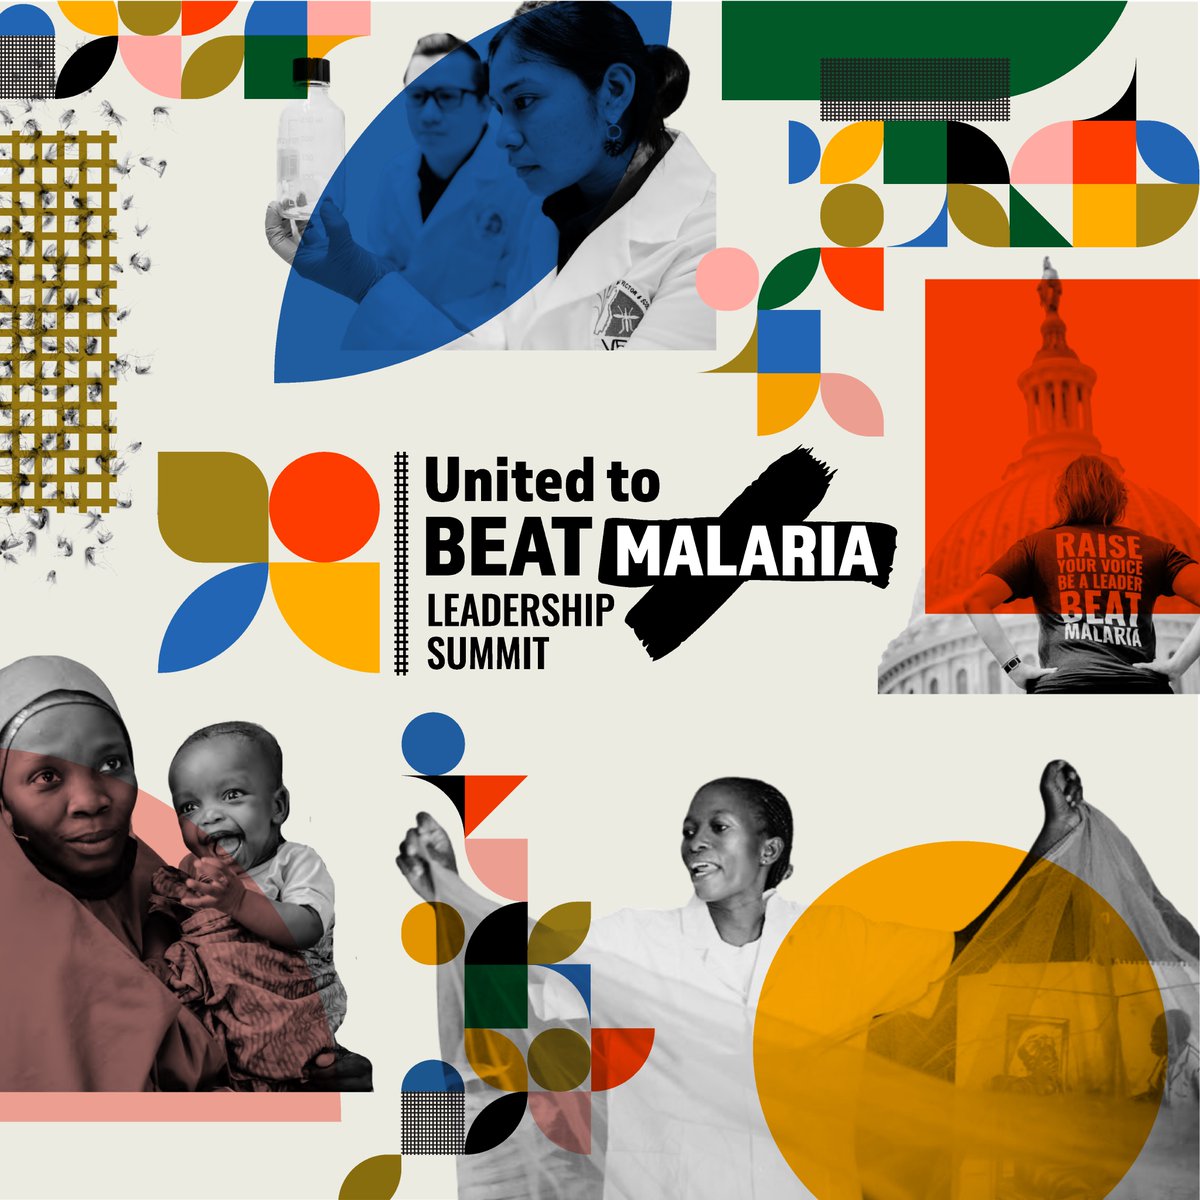 We're excited to join @BeatMalaria's Leadership Summit in DC this week! We are calling on Congress to strengthen support for vital #malaria 🦟 intervention programs that have saved millions of lives. With strong US bipartisan support, we can end this deadly disease! #BeatMalaria